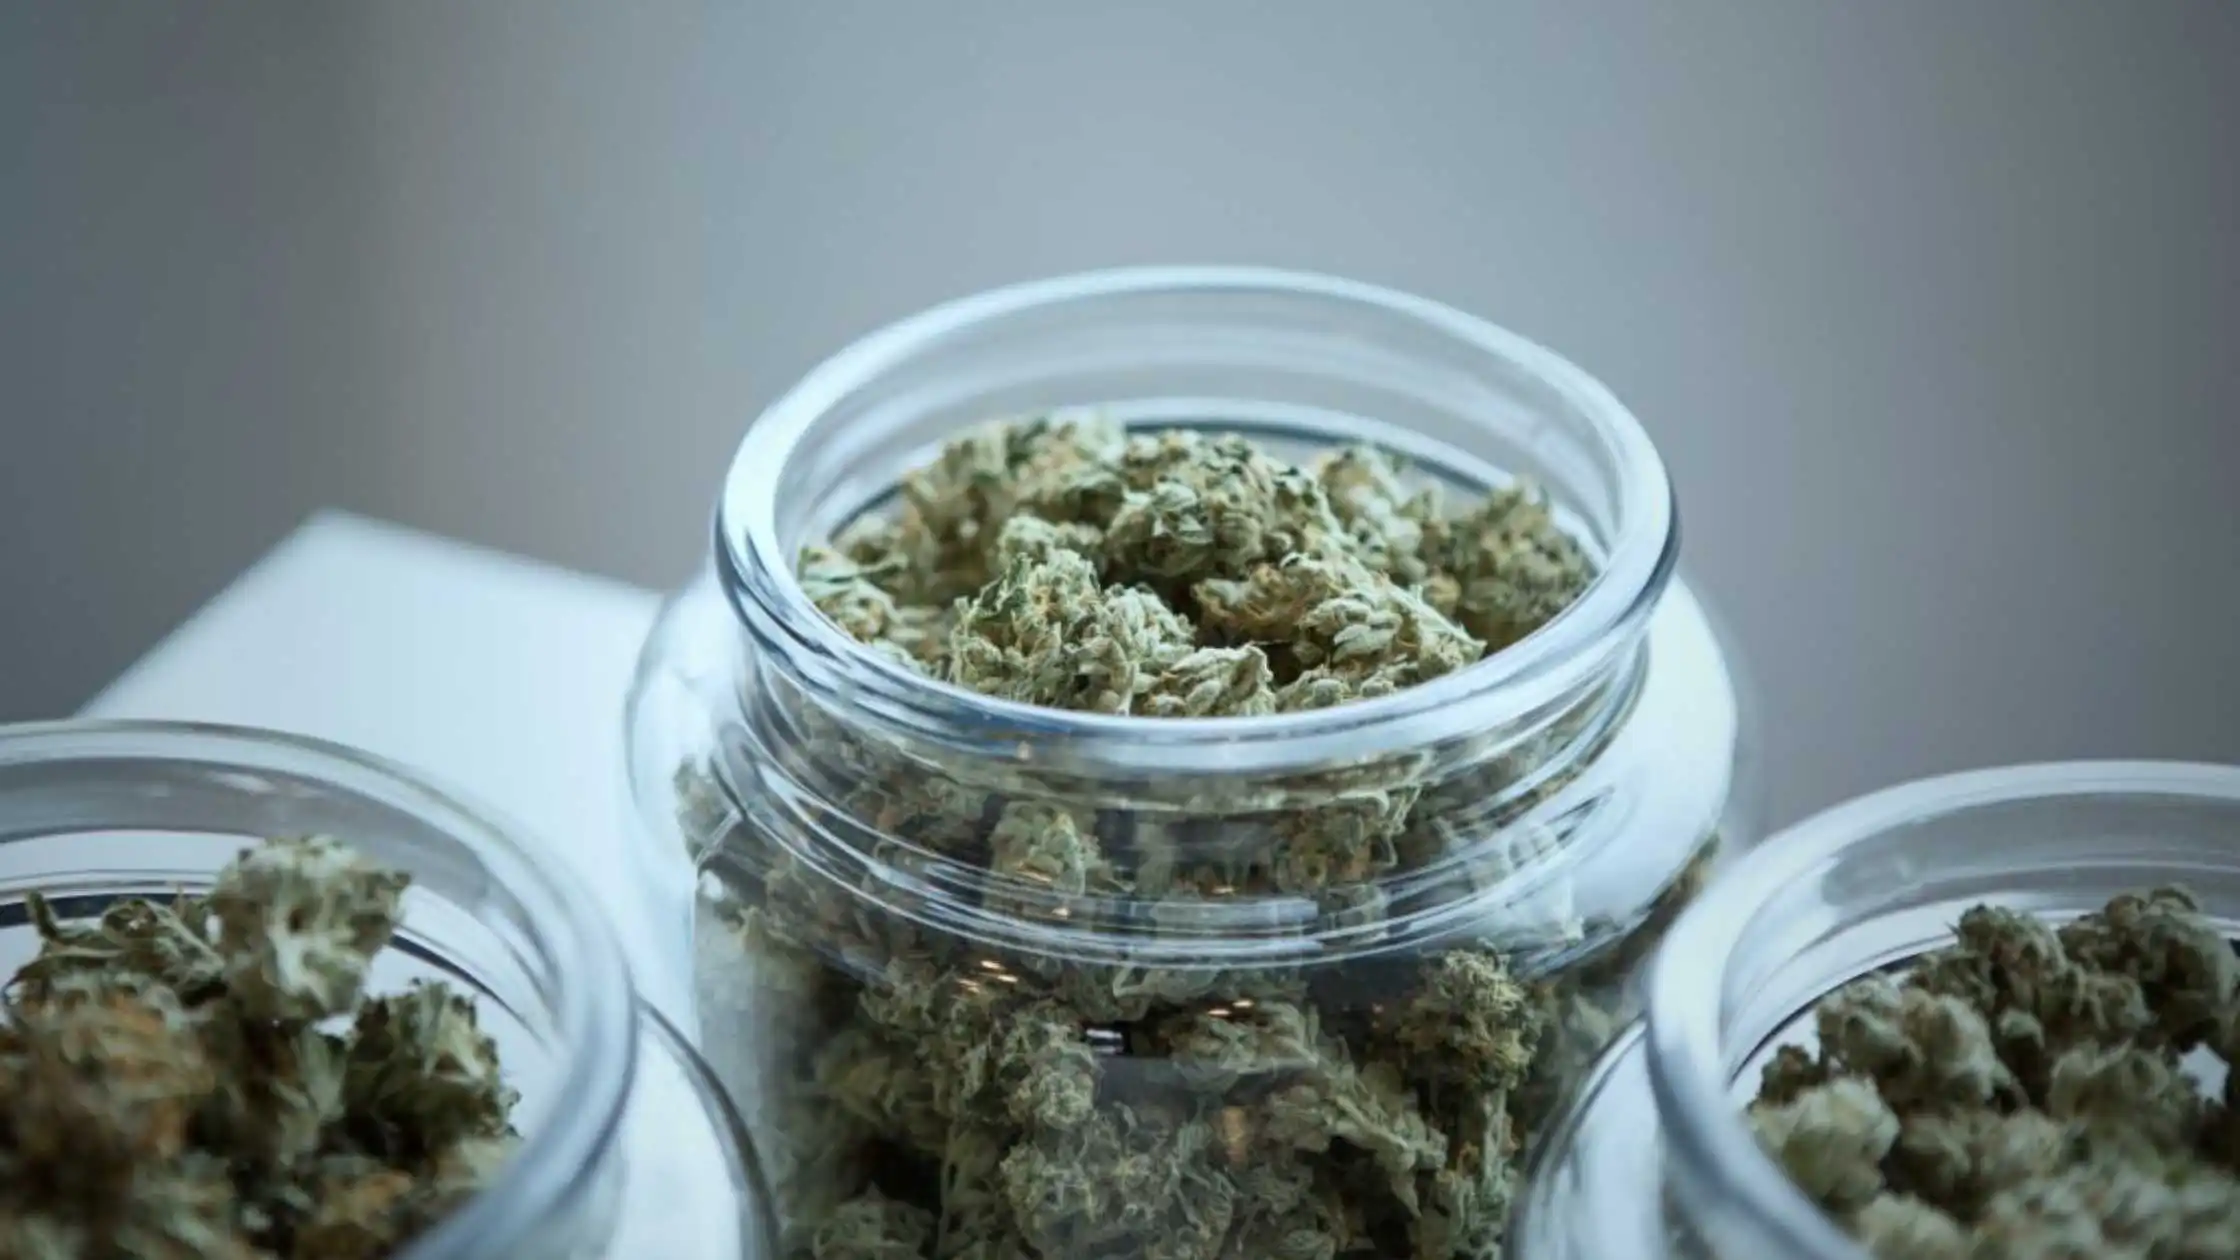 NY Based Docs Can Now Prescribe Medical Marijuana for Patients with Any Condition They See Fit